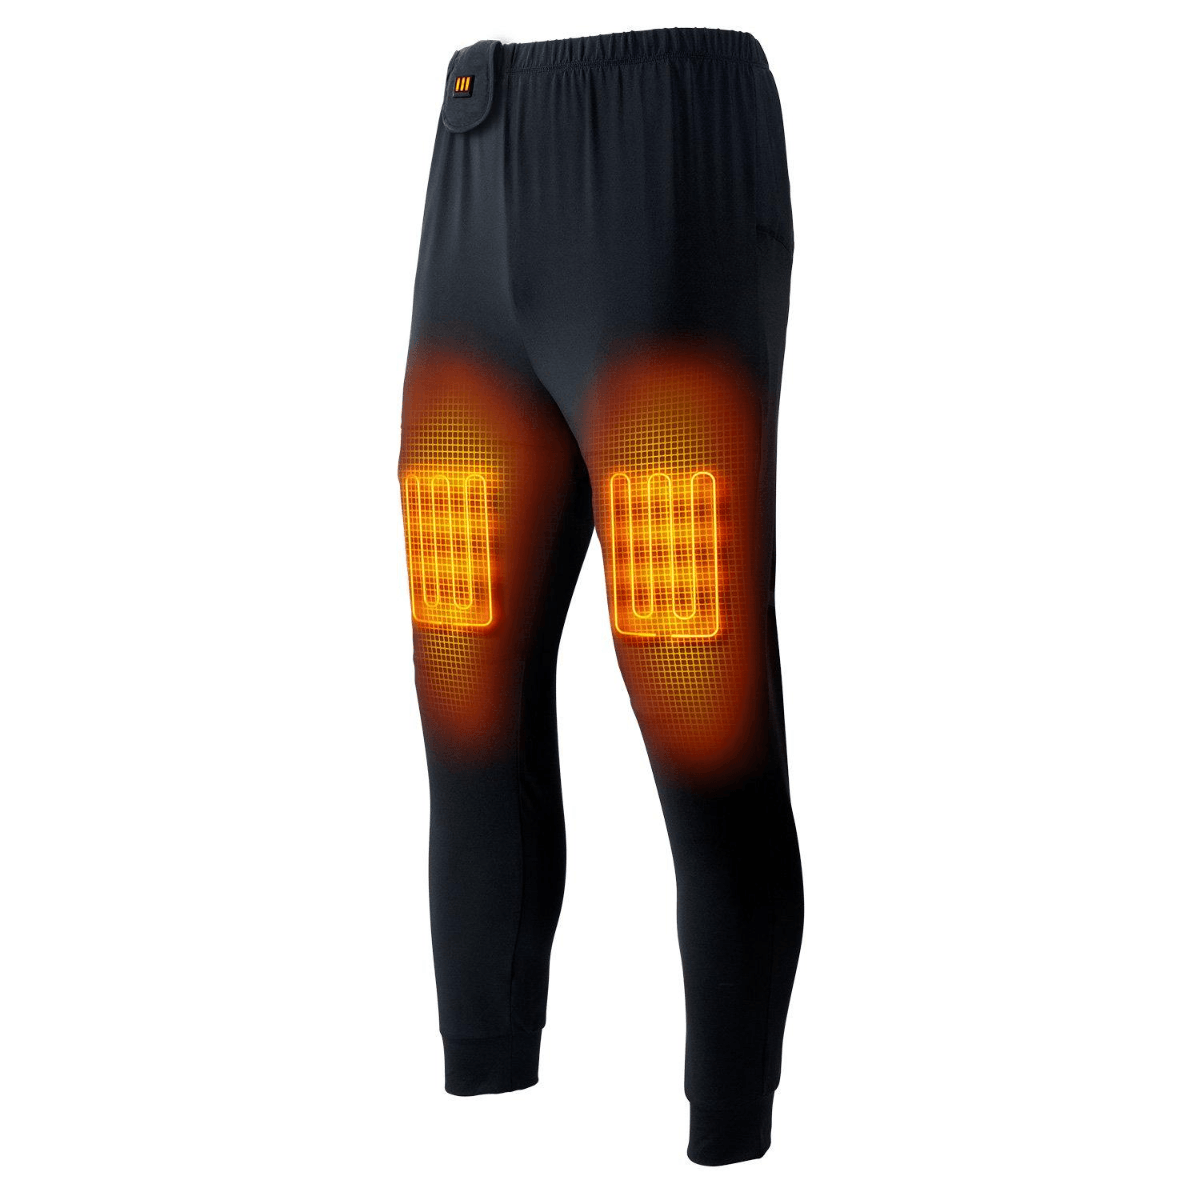 Gobi Heat Basecamp Heated Base Layer Pant - Men's - Al's Sporting Goods:  Your One-Stop Shop for Outdoor Sports Gear & Apparel